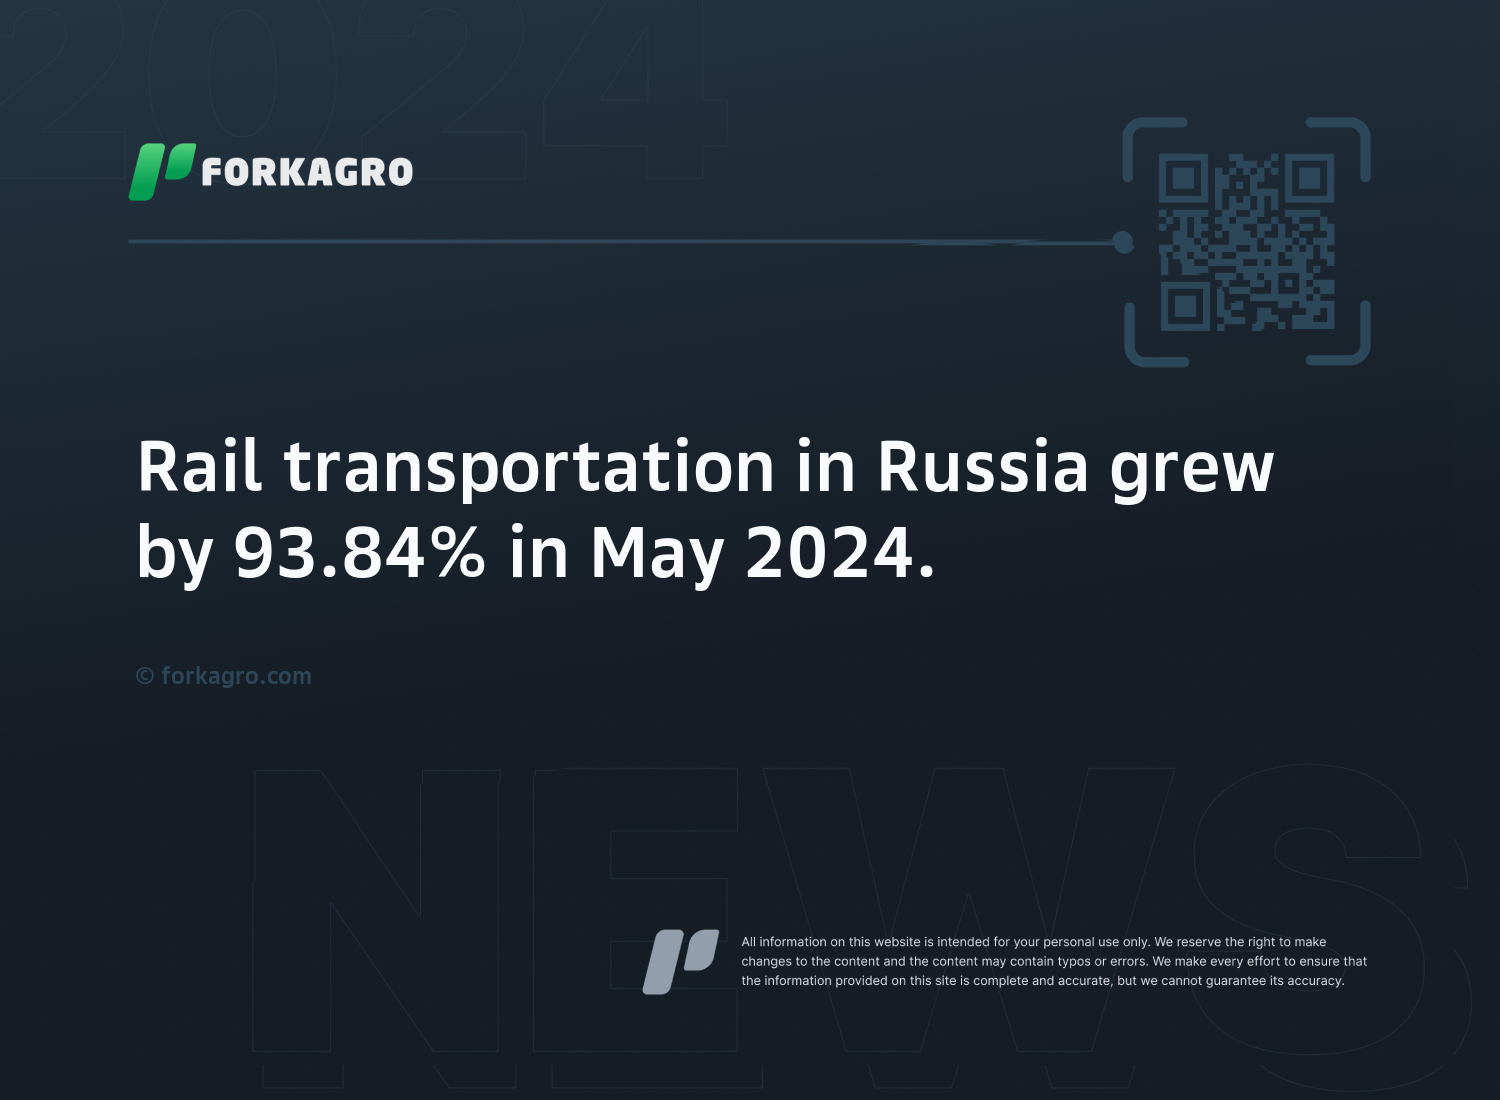 Rail transportation in Russia grew by 93.84% in May 2024.